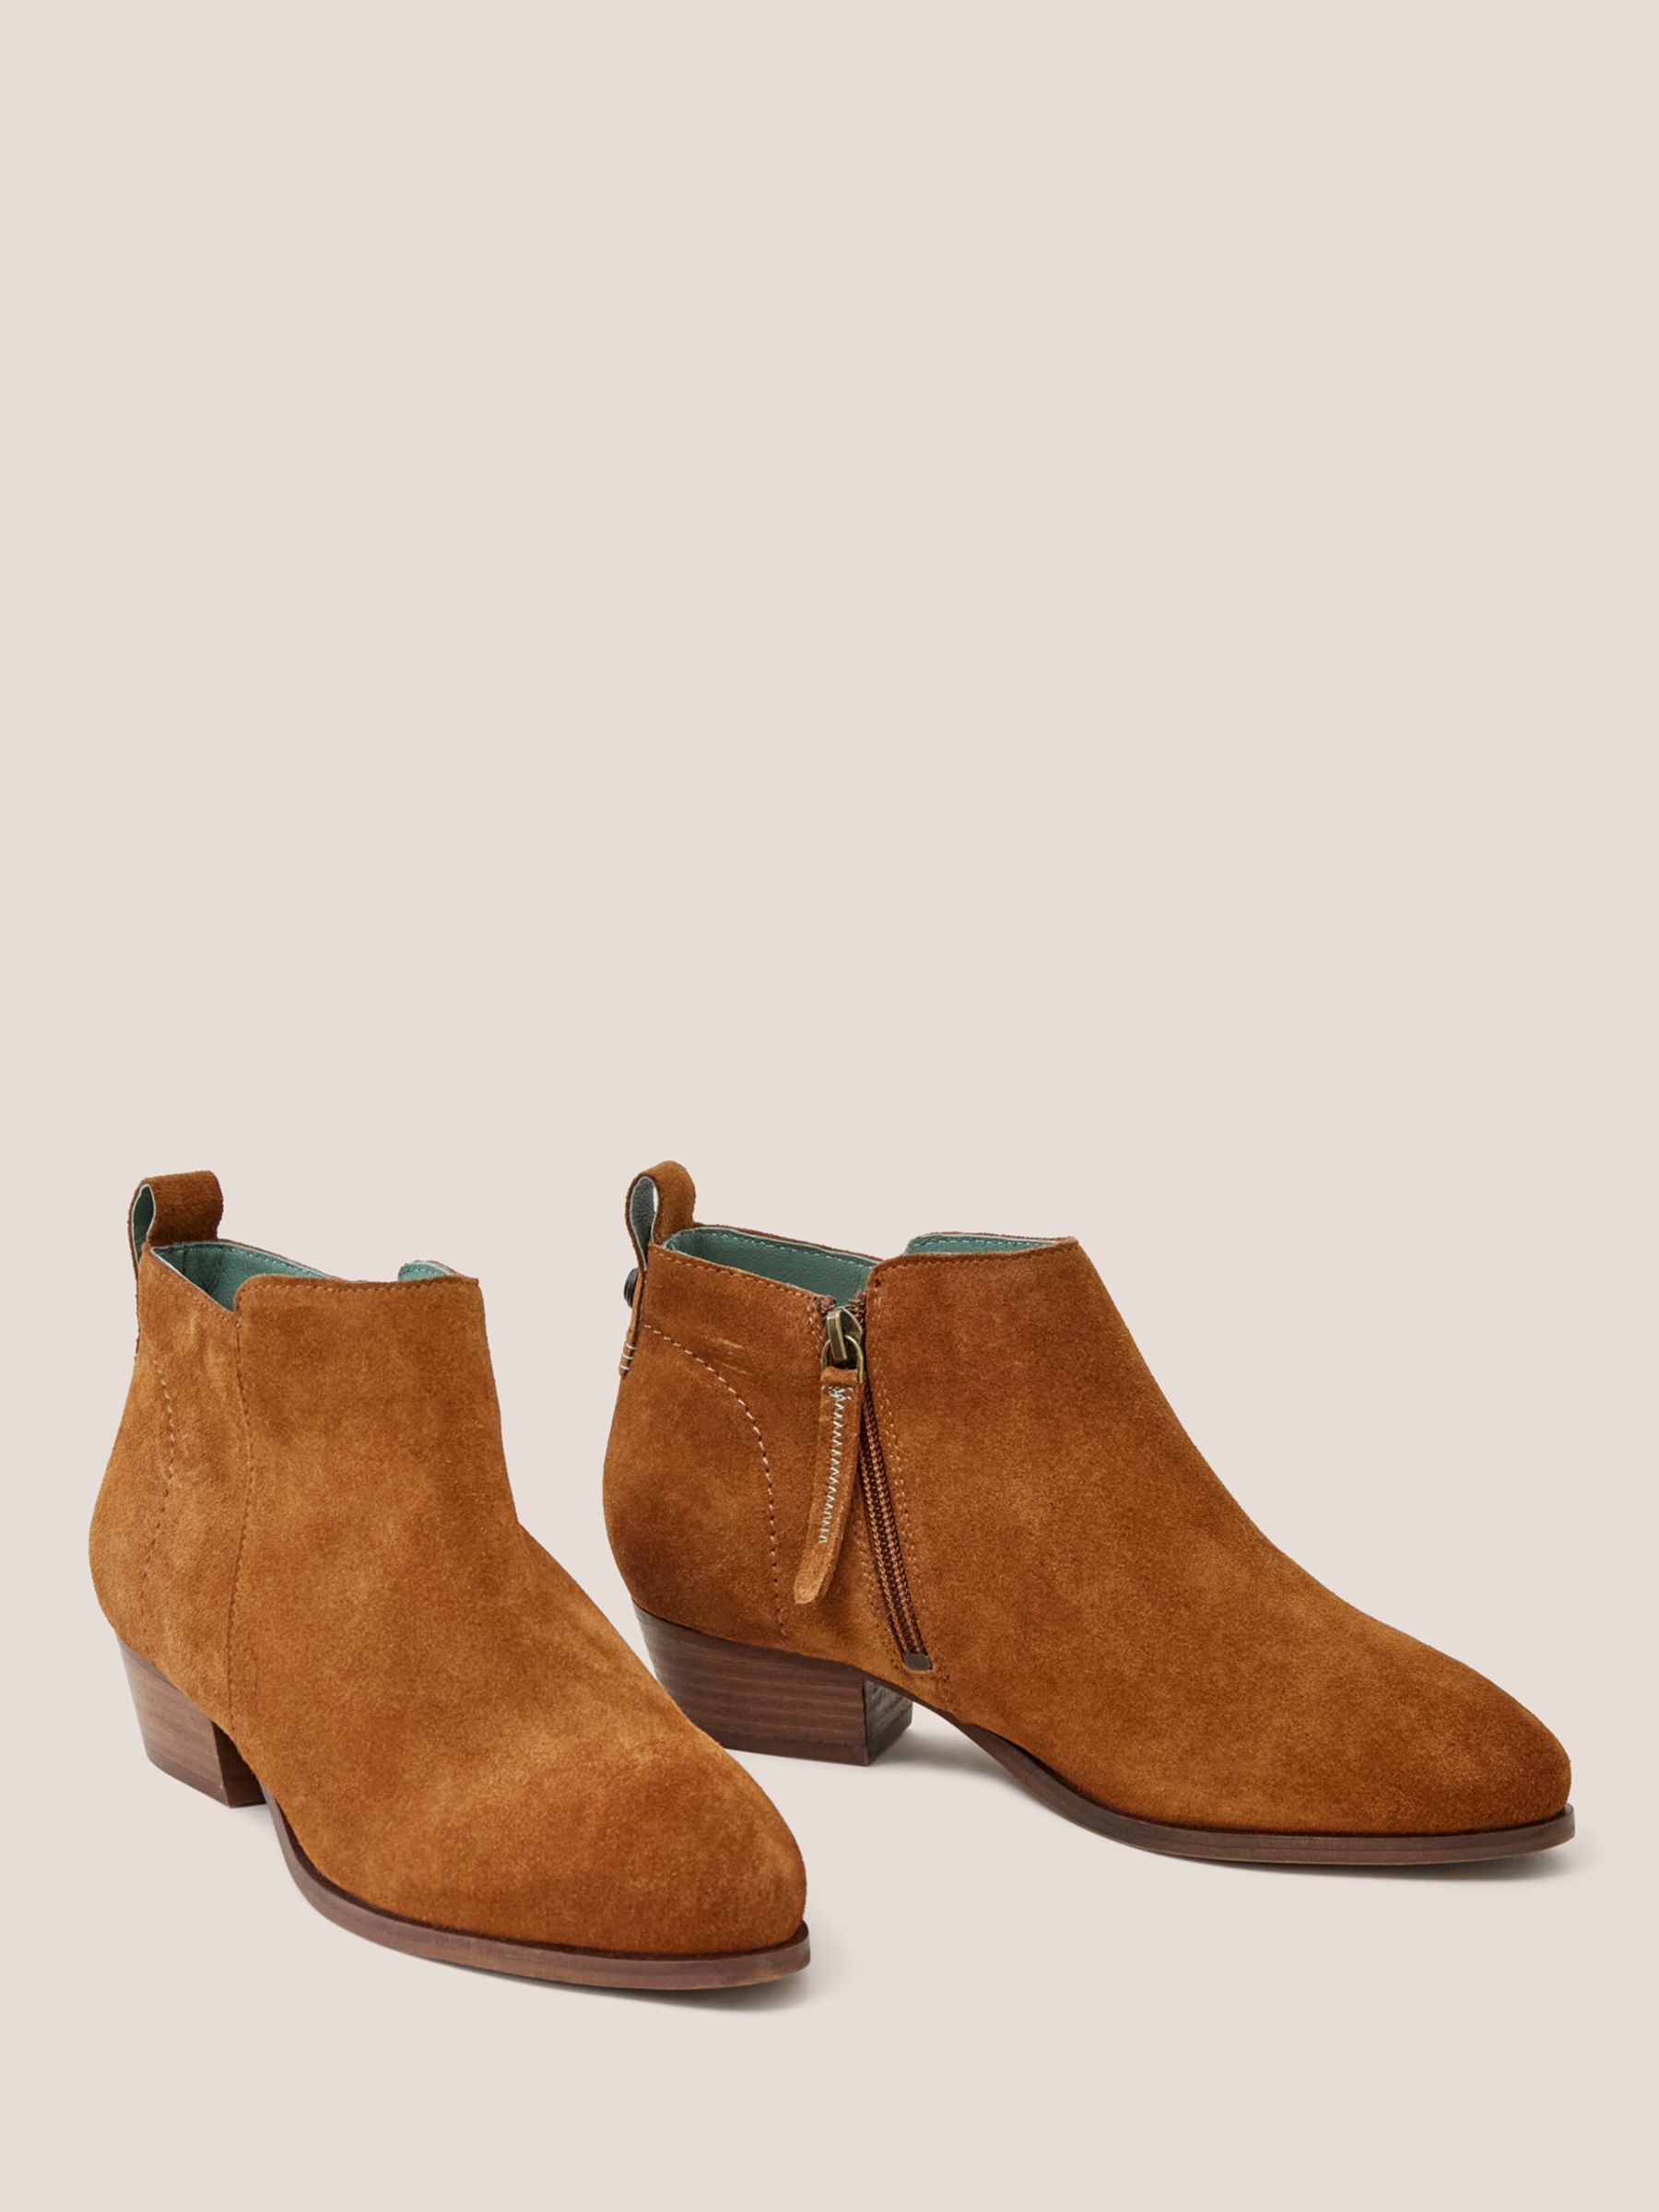 Buy White Stuff Wide Fit Ankle Boots Online at johnlewis.com